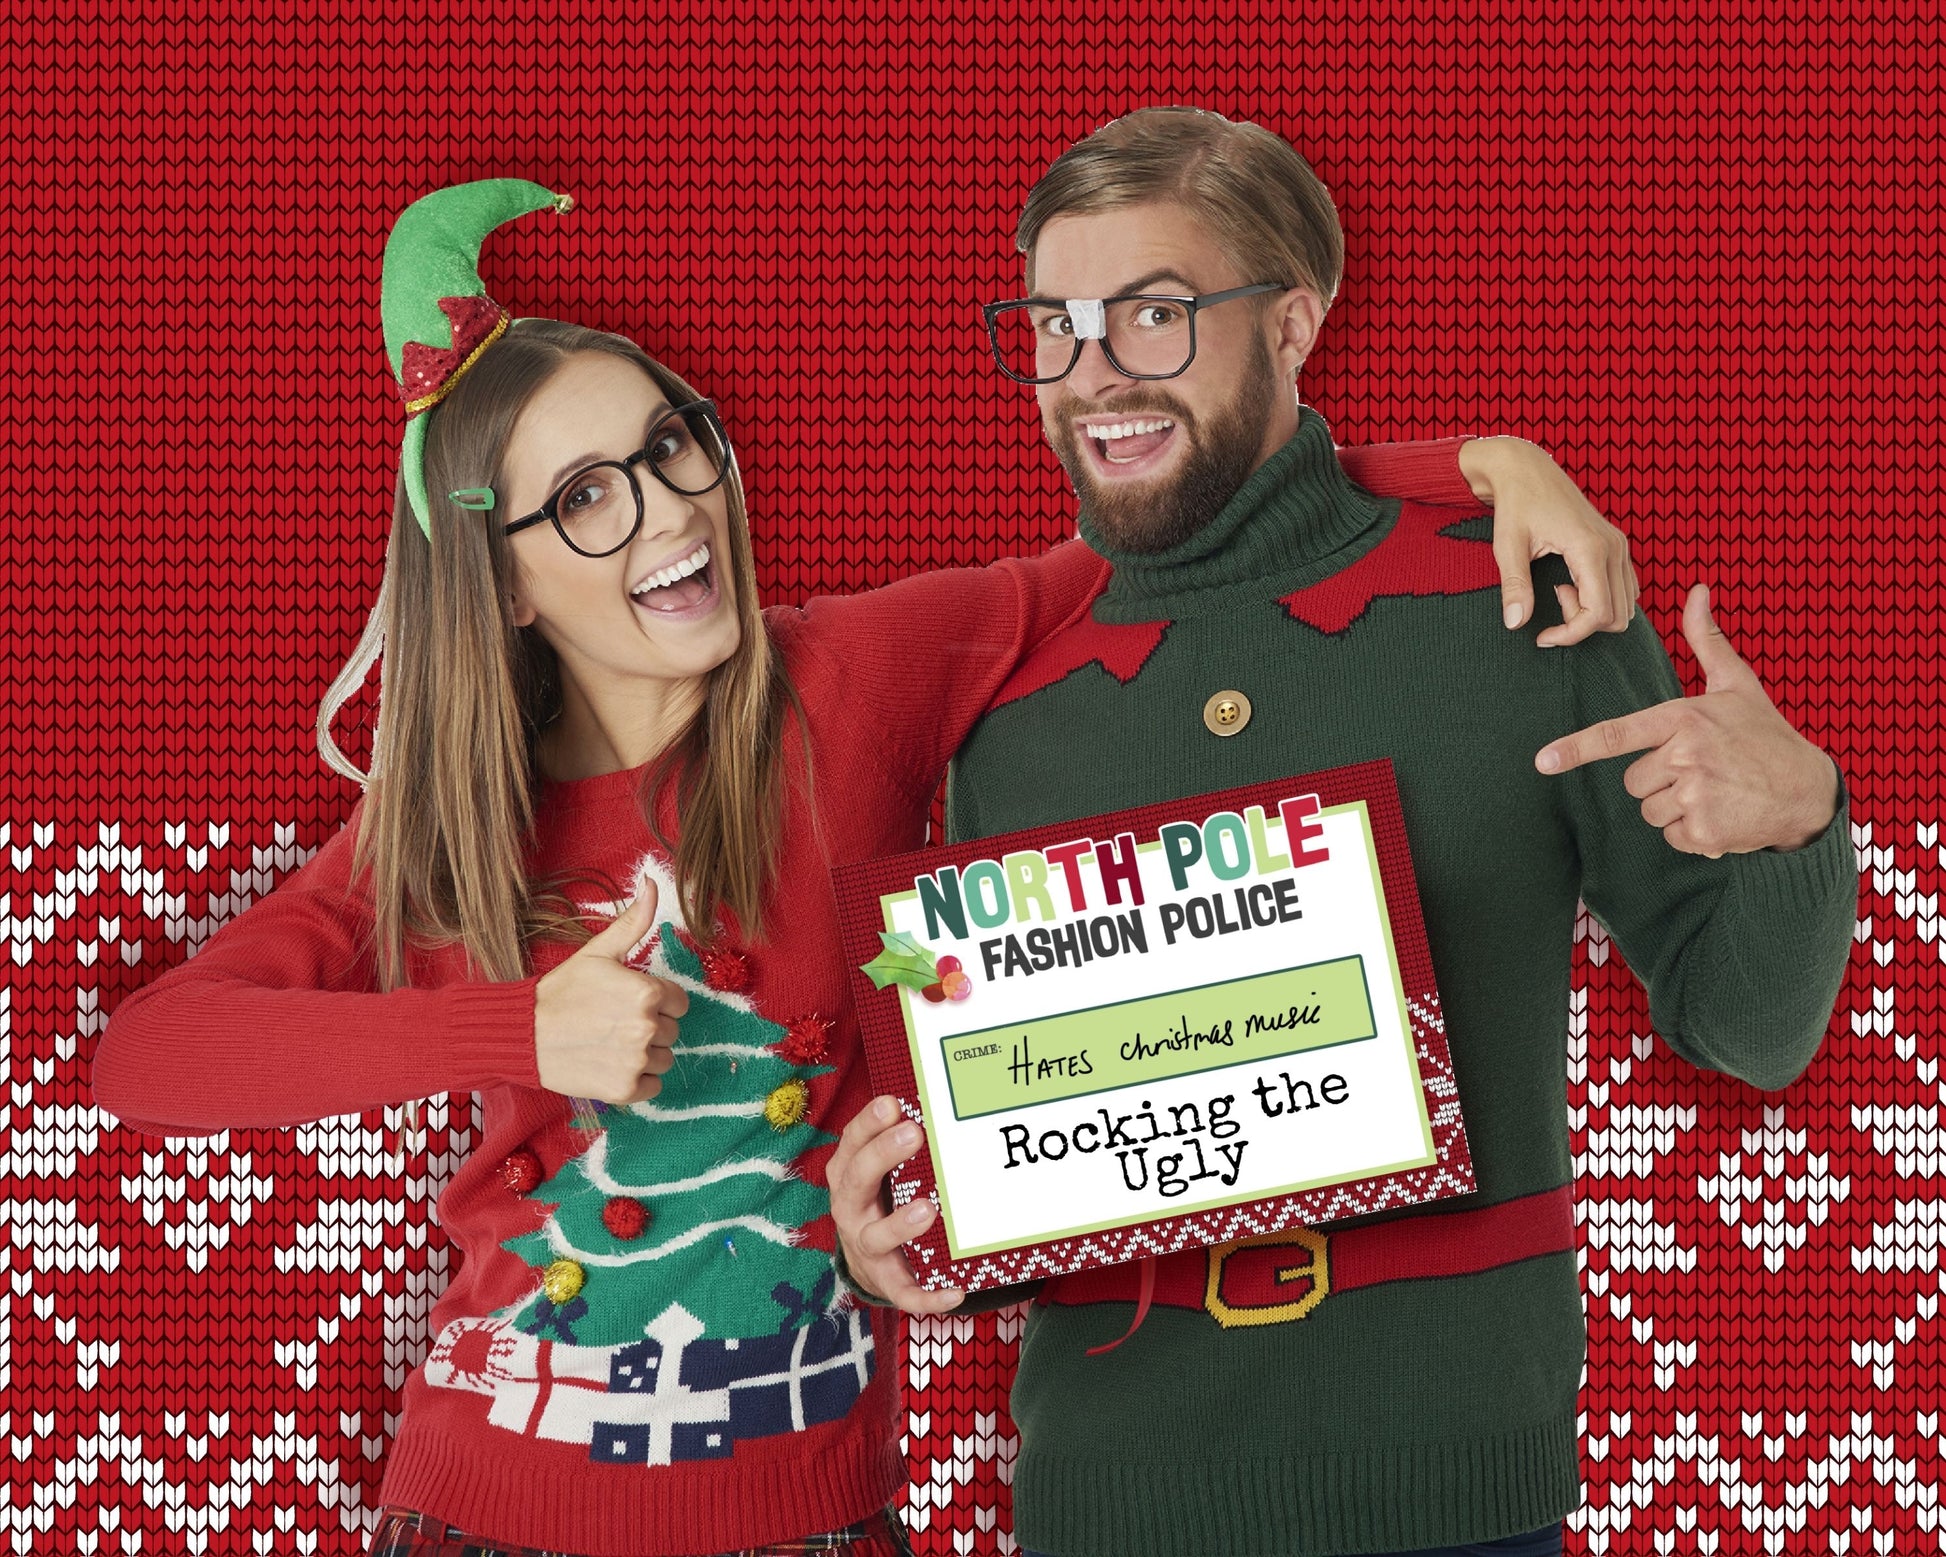 man and woman holding an ugly sweater sign